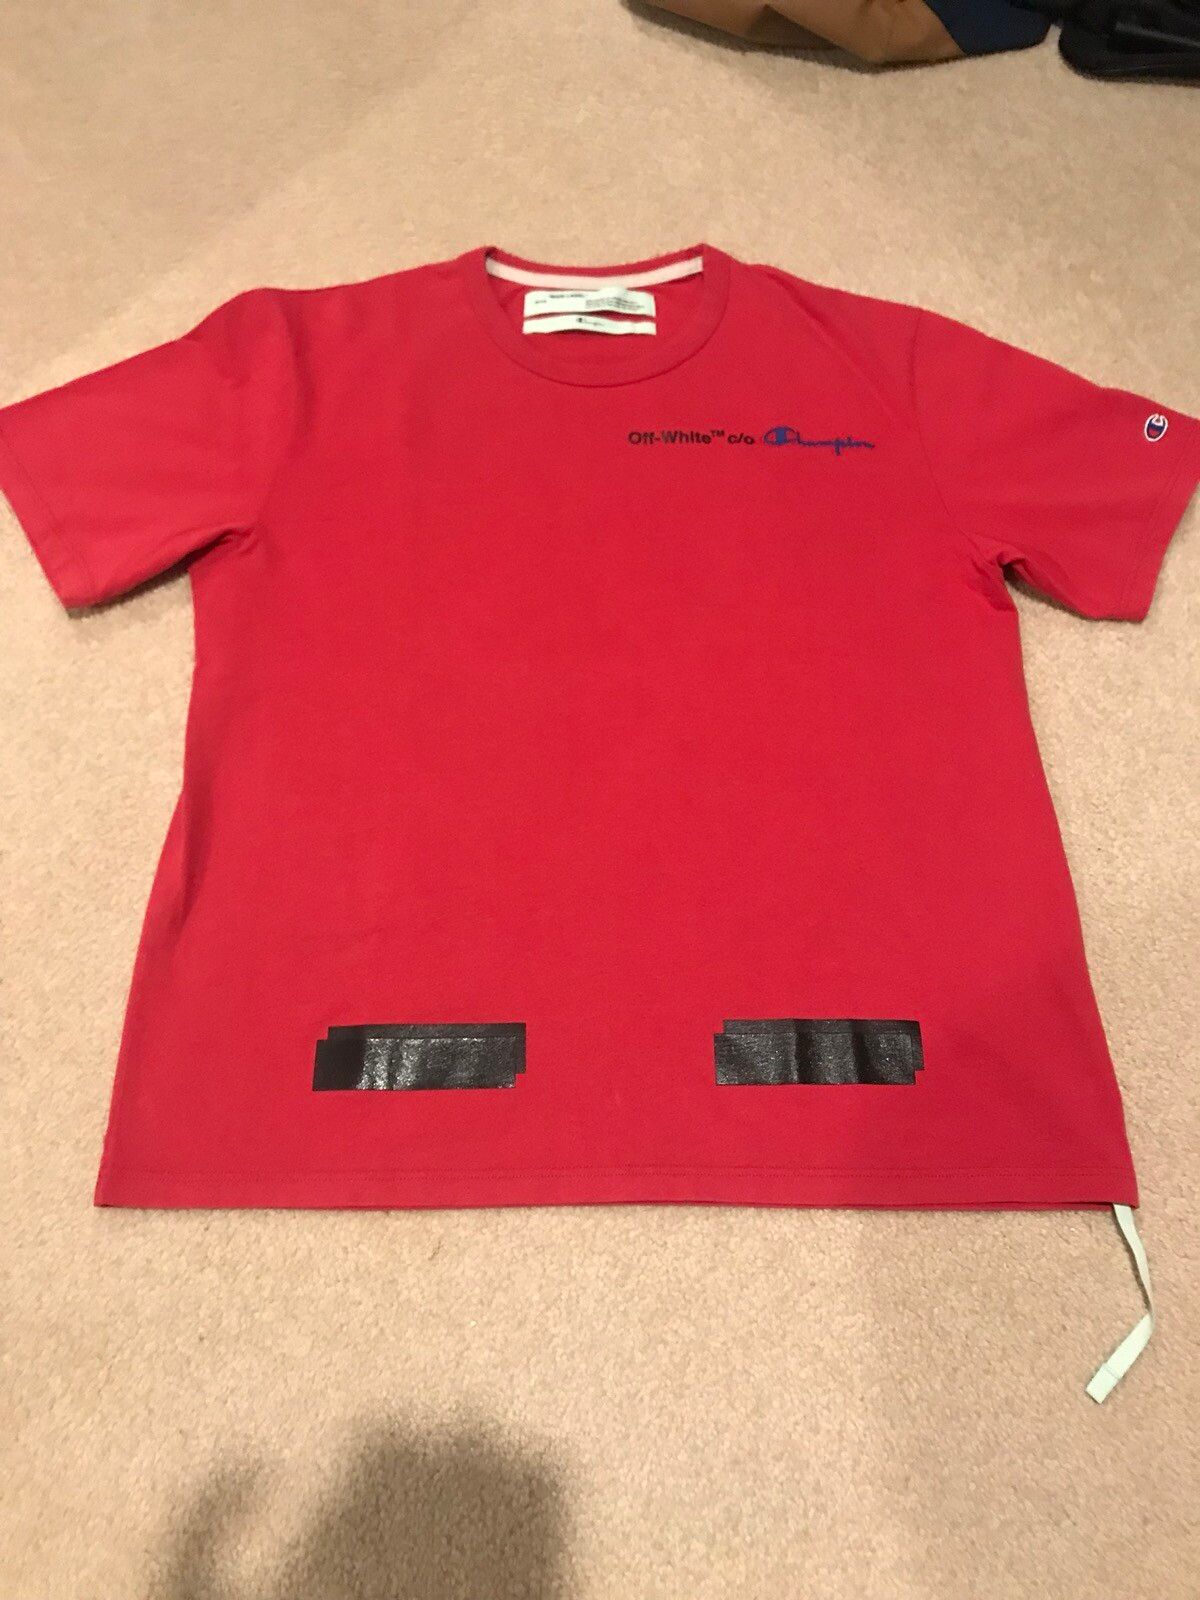 Off-White Red T-Shirt | Grailed